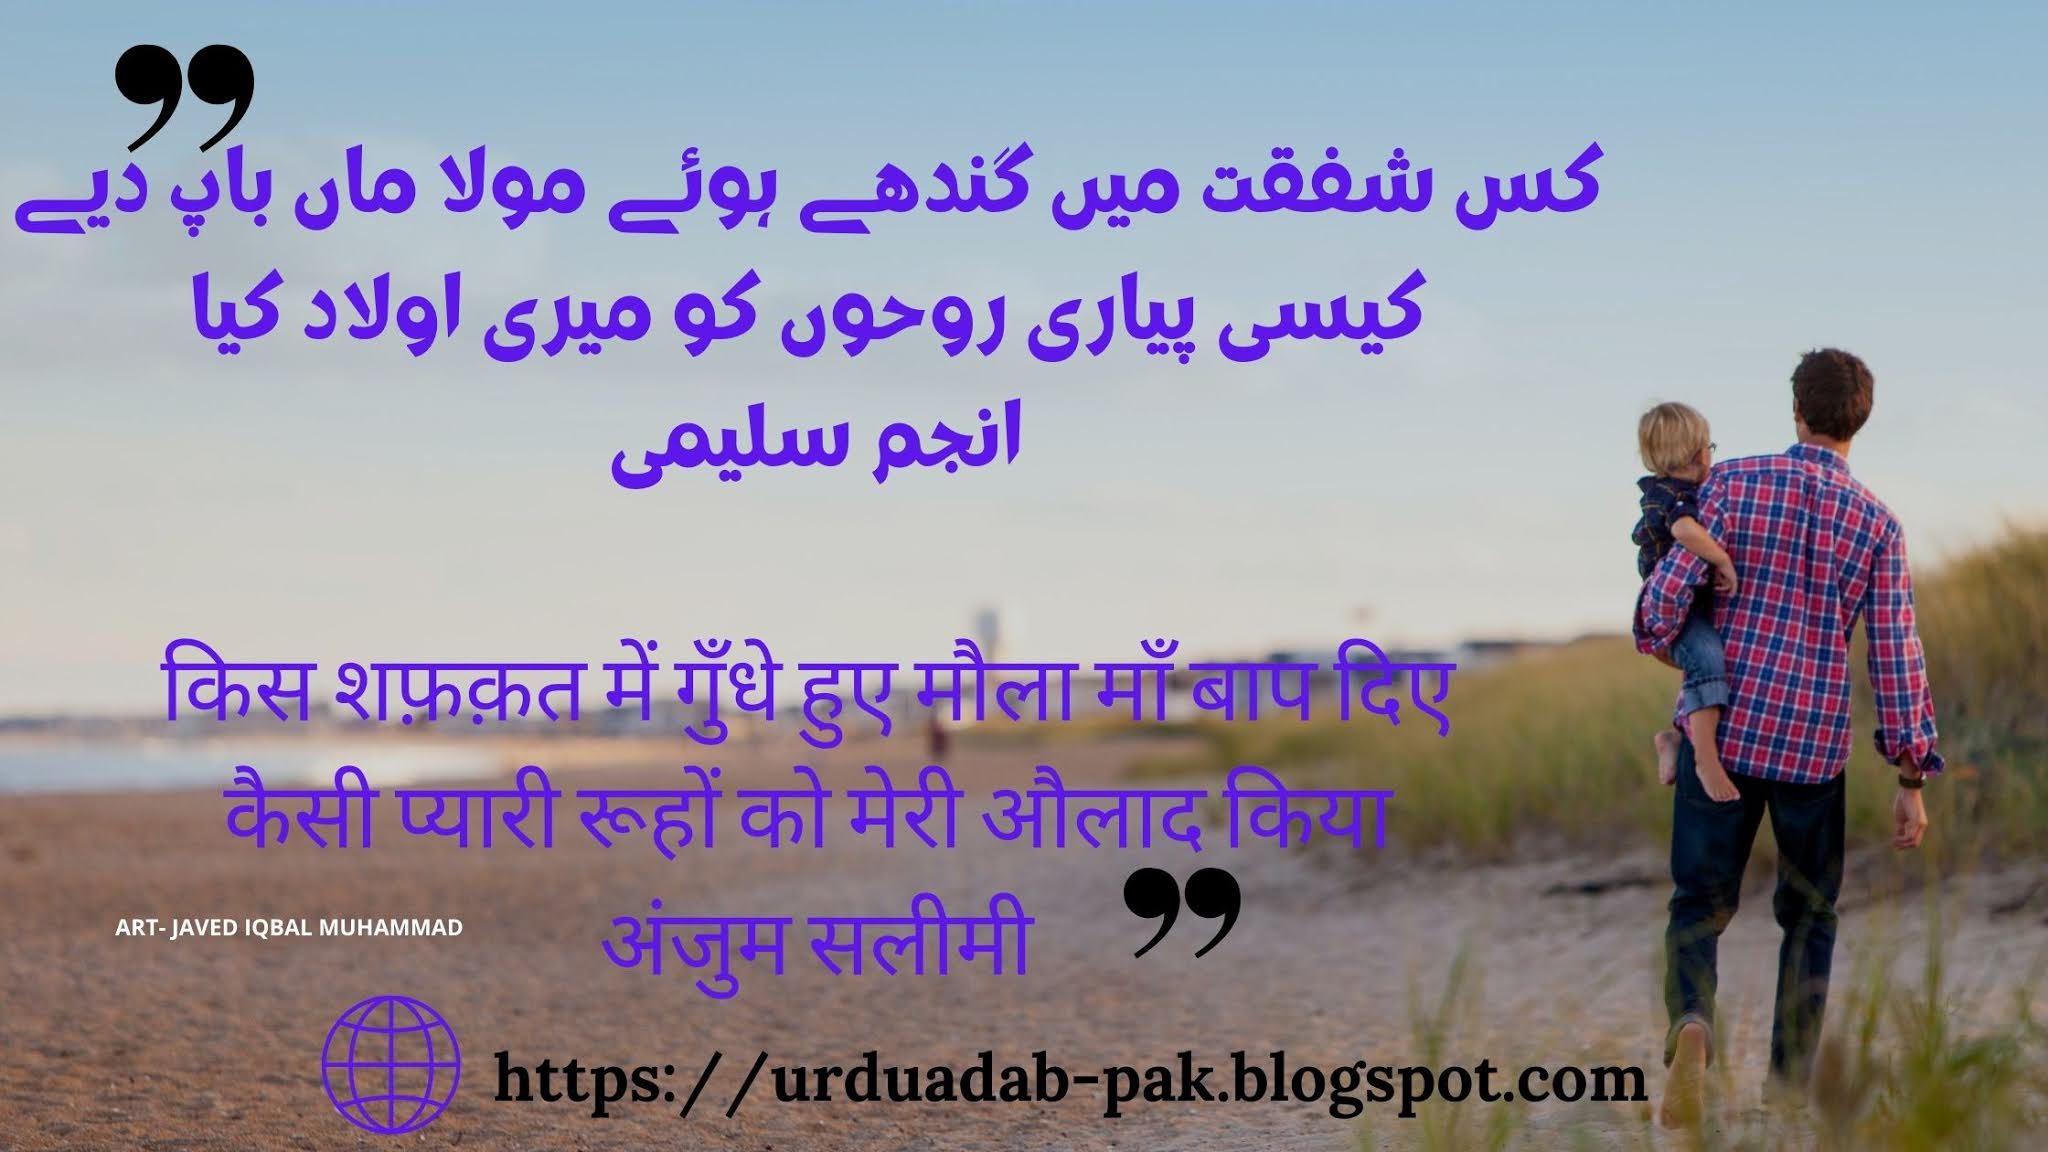 Father-Day-Shayari-Father-Day-Poetry-in-urdu-two-lines-Urdu Poetry-Urdu -Shayari- Best-Poetry-In Urdu-Urdu-Ghazal-Hindi Shayari-love poetry-sad-poetryFather-Day-Shayari-Father-Day-Poetry-in-urdu-two-lines-Urdu Poetry-Urdu -Shayari- Best-Poetry-In Urdu-Urdu-Ghazal-Hindi Shayari-love poetry-sad-poetryFather-Day-Shayari-Father-Day-Poetry-in-urdu-two-lines-Urdu Poetry-Urdu -Shayari- Best-Poetry-In Urdu-Urdu-Ghazal-Hindi Shayari-love poetry-sad-poetryFather-Day-Shayari-Father-Day-Poetry-in-urdu-two-lines-Urdu Poetry-Urdu -Shayari- Best-Poetry-In Urdu-Urdu-Ghazal-Hindi Shayari-love poetry-sad-poetryFather-Day-Shayari-Father-Day-Poetry-in-urdu-two-lines-Urdu Poetry-Urdu -Shayari- Best-Poetry-In Urdu-Urdu-Ghazal-Hindi Shayari-love poetry-sad-poetryFather-Day-Shayari-Father-Day-Poetry-in-urdu-two-lines-Urdu Poetry-Urdu -Shayari- Best-Poetry-In Urdu-Urdu-Ghazal-Hindi Shayari-love poetry-sad-poetryFather-Day-Shayari-Father-Day-Poetry-in-urdu-two-lines-Urdu Poetry-Urdu -Shayari- Best-Poetry-In Urdu-Urdu-Ghazal-Hindi Shayari-love poetry-sad-poetry